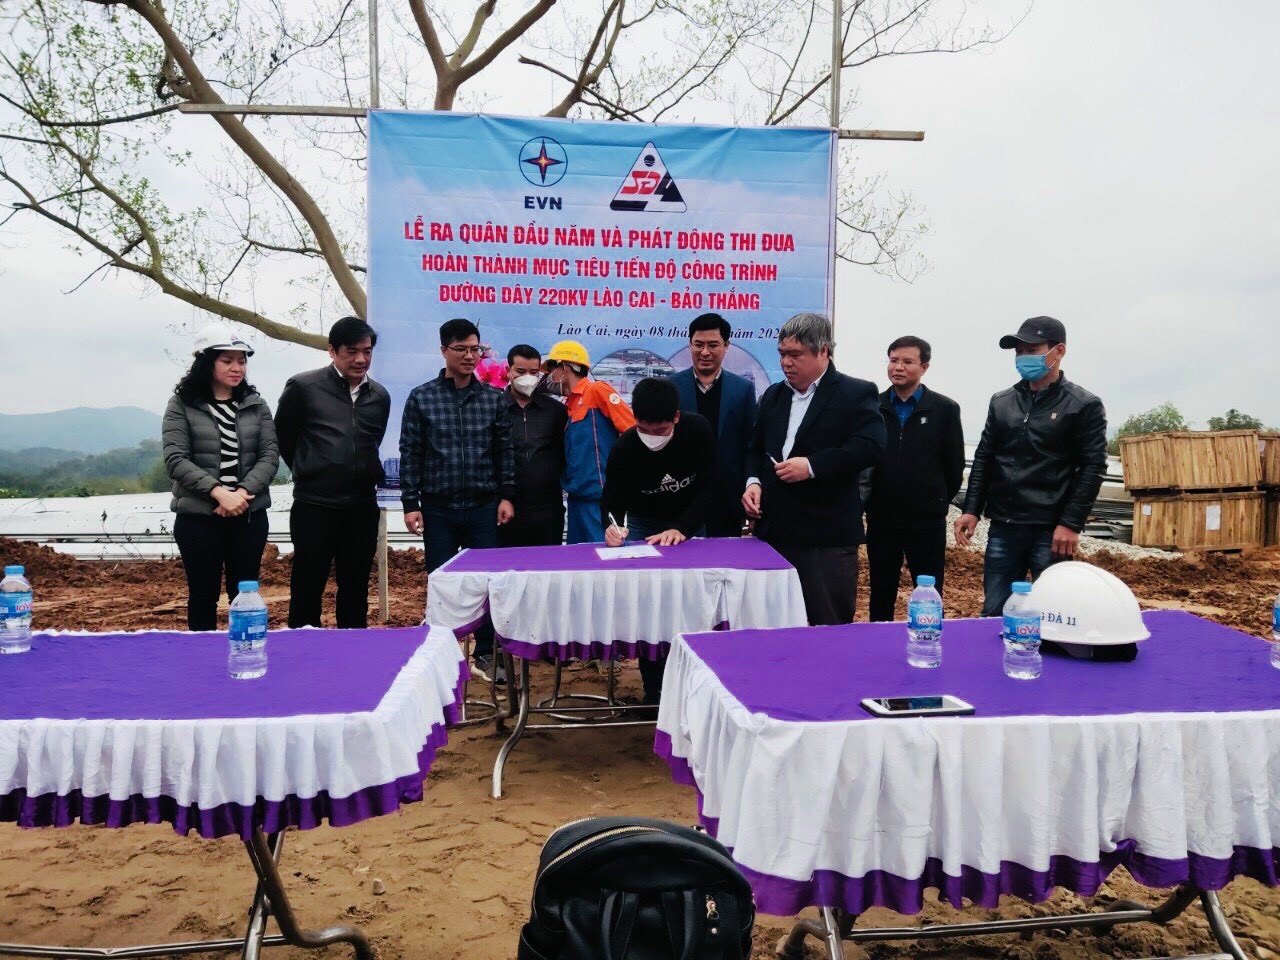 The signing ceremony of the contract to launch the emulation at the No. 1 position of the 220kV Lao Cai - Bao Thang transmission line project